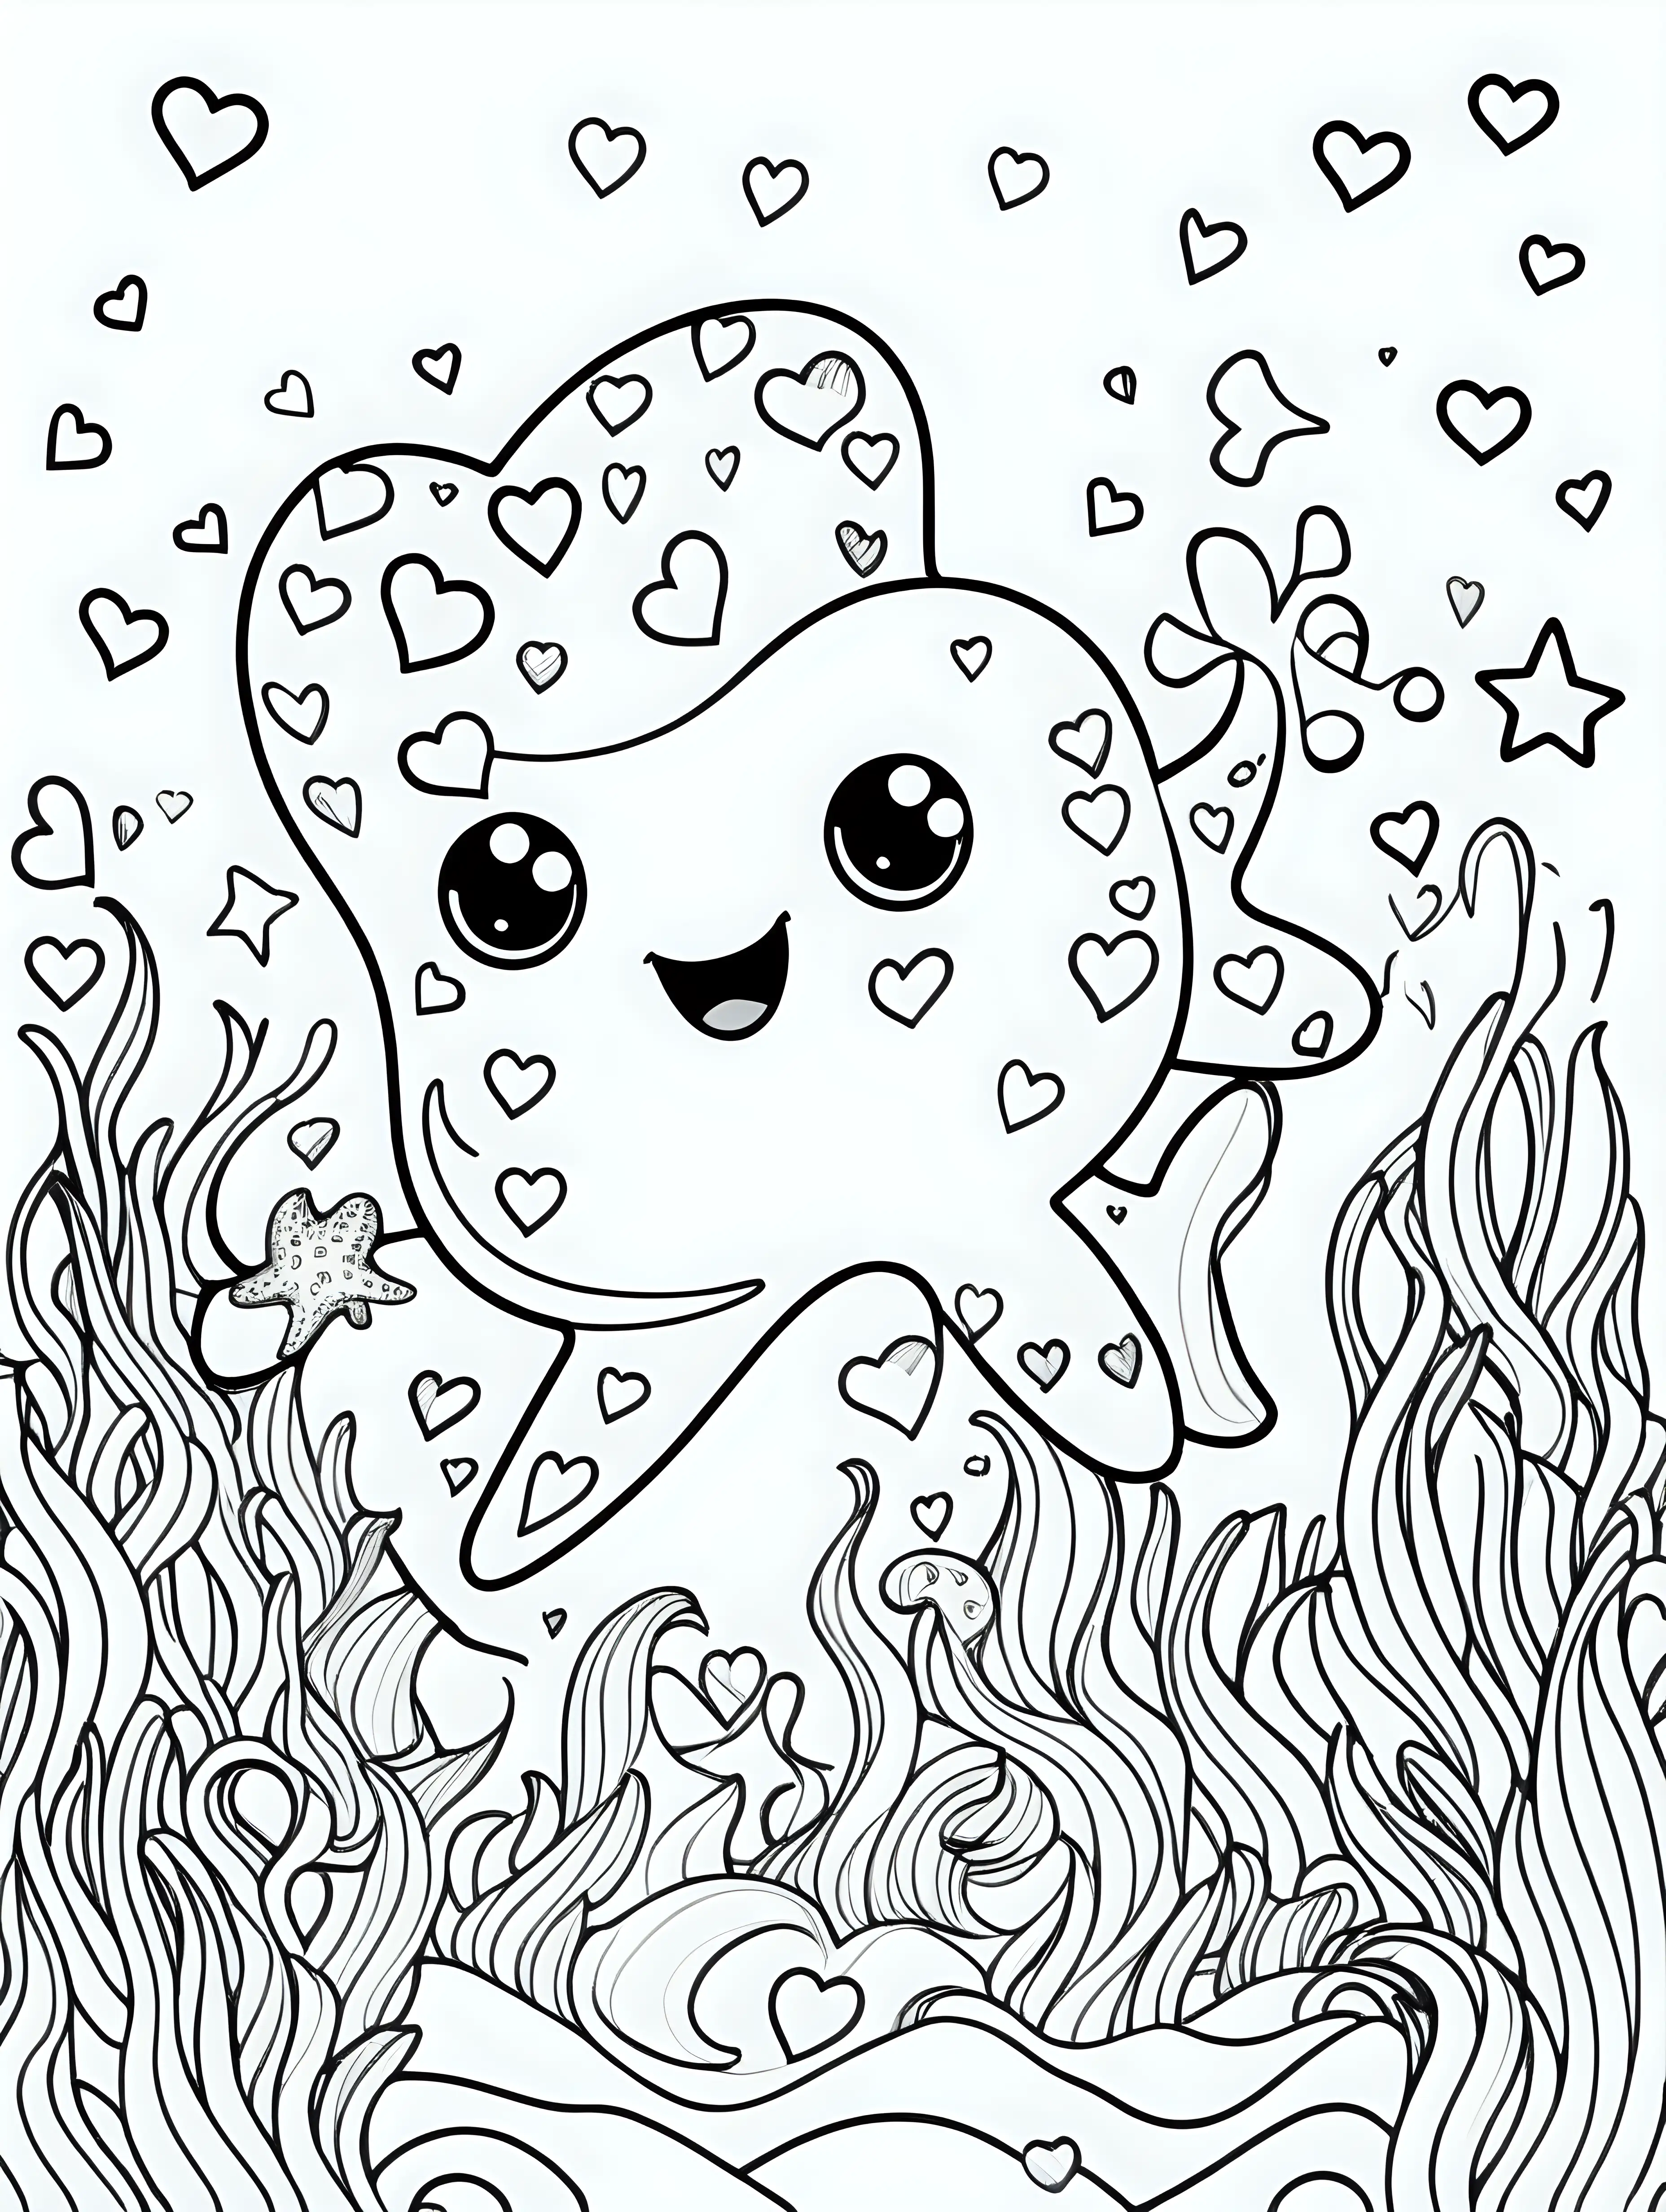 create a black line detailed sketch illustration coloring page of cute star fish in the ocean surrounded with hearts, crisp black outlines, no shading